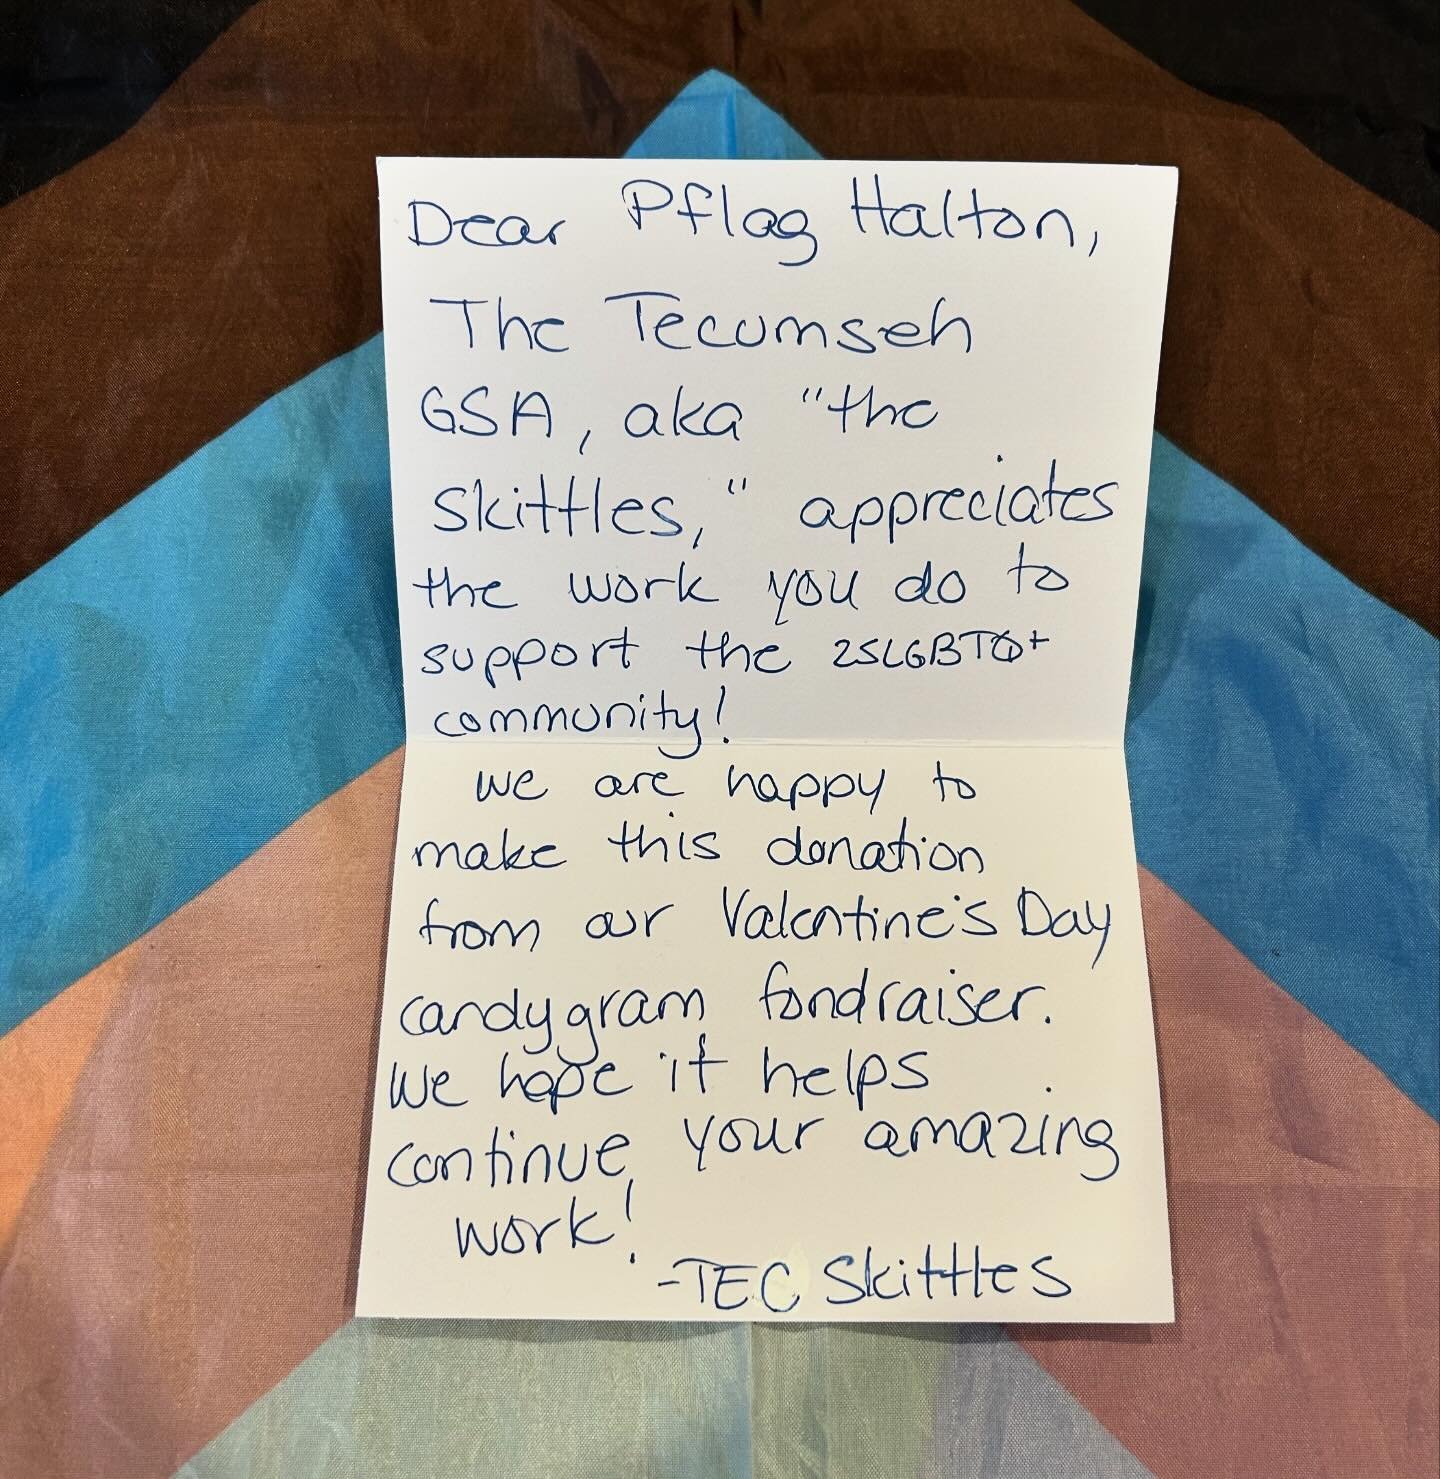 Thanks to the Skittles at @tecumsehps_burlington for making our day with this surprise in the mail. Your donation will help us continue to bring programming and supports to 2SLGBTQIA+ youth. And you absolutely reminded our volunteer team why we do th